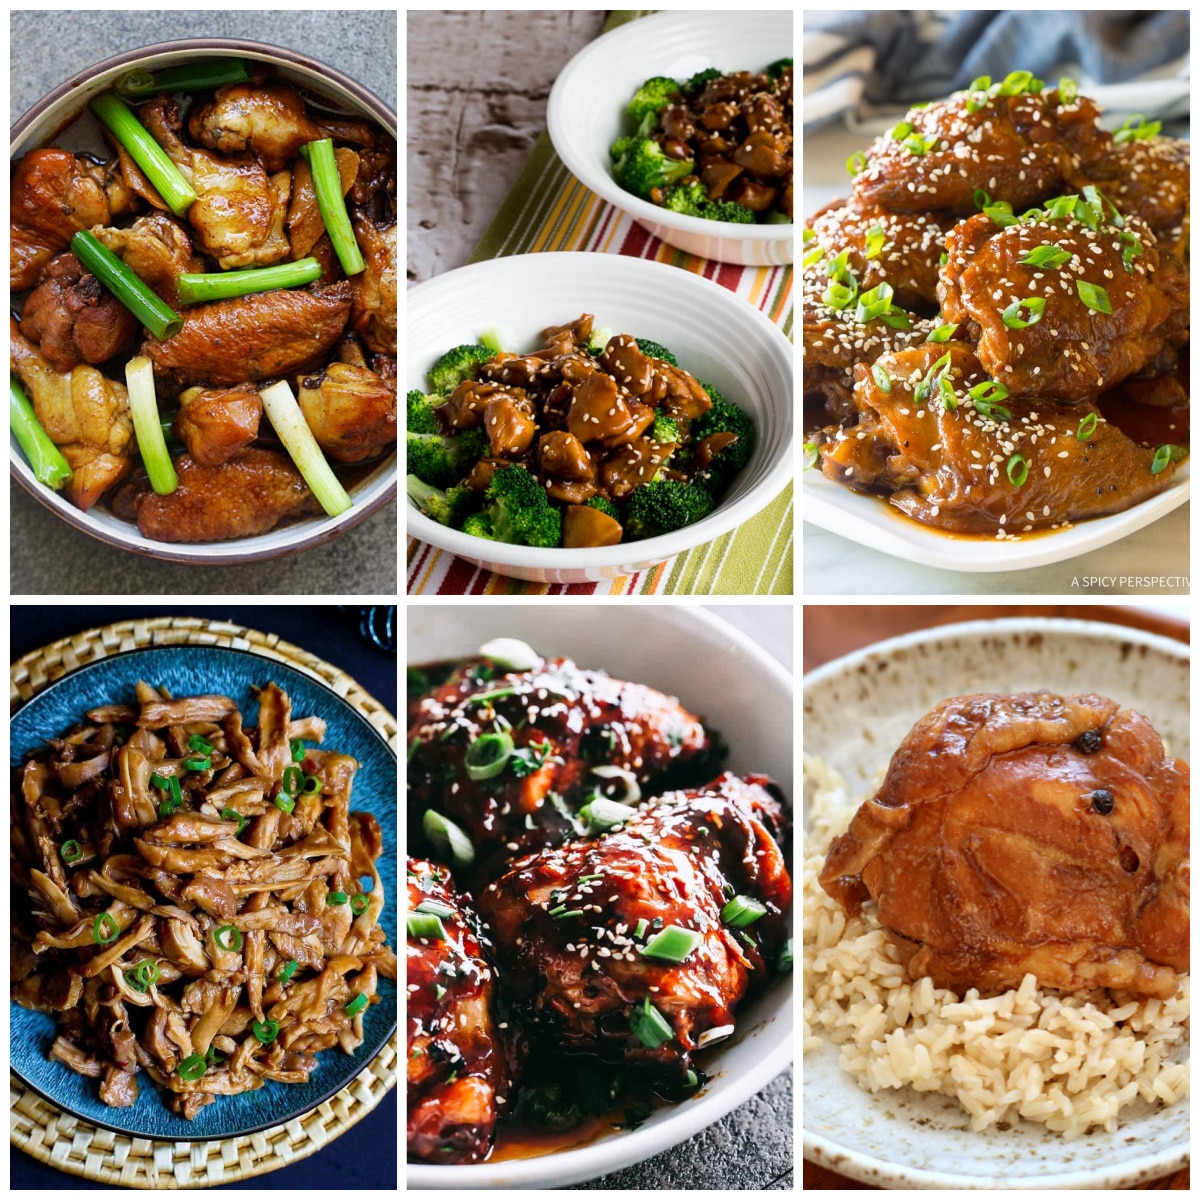 https://www.slowcookerfromscratch.com/wp-content/uploads/2019/10/Slow-cooker-instant-pot-asian-chicken-collage-1200.jpeg